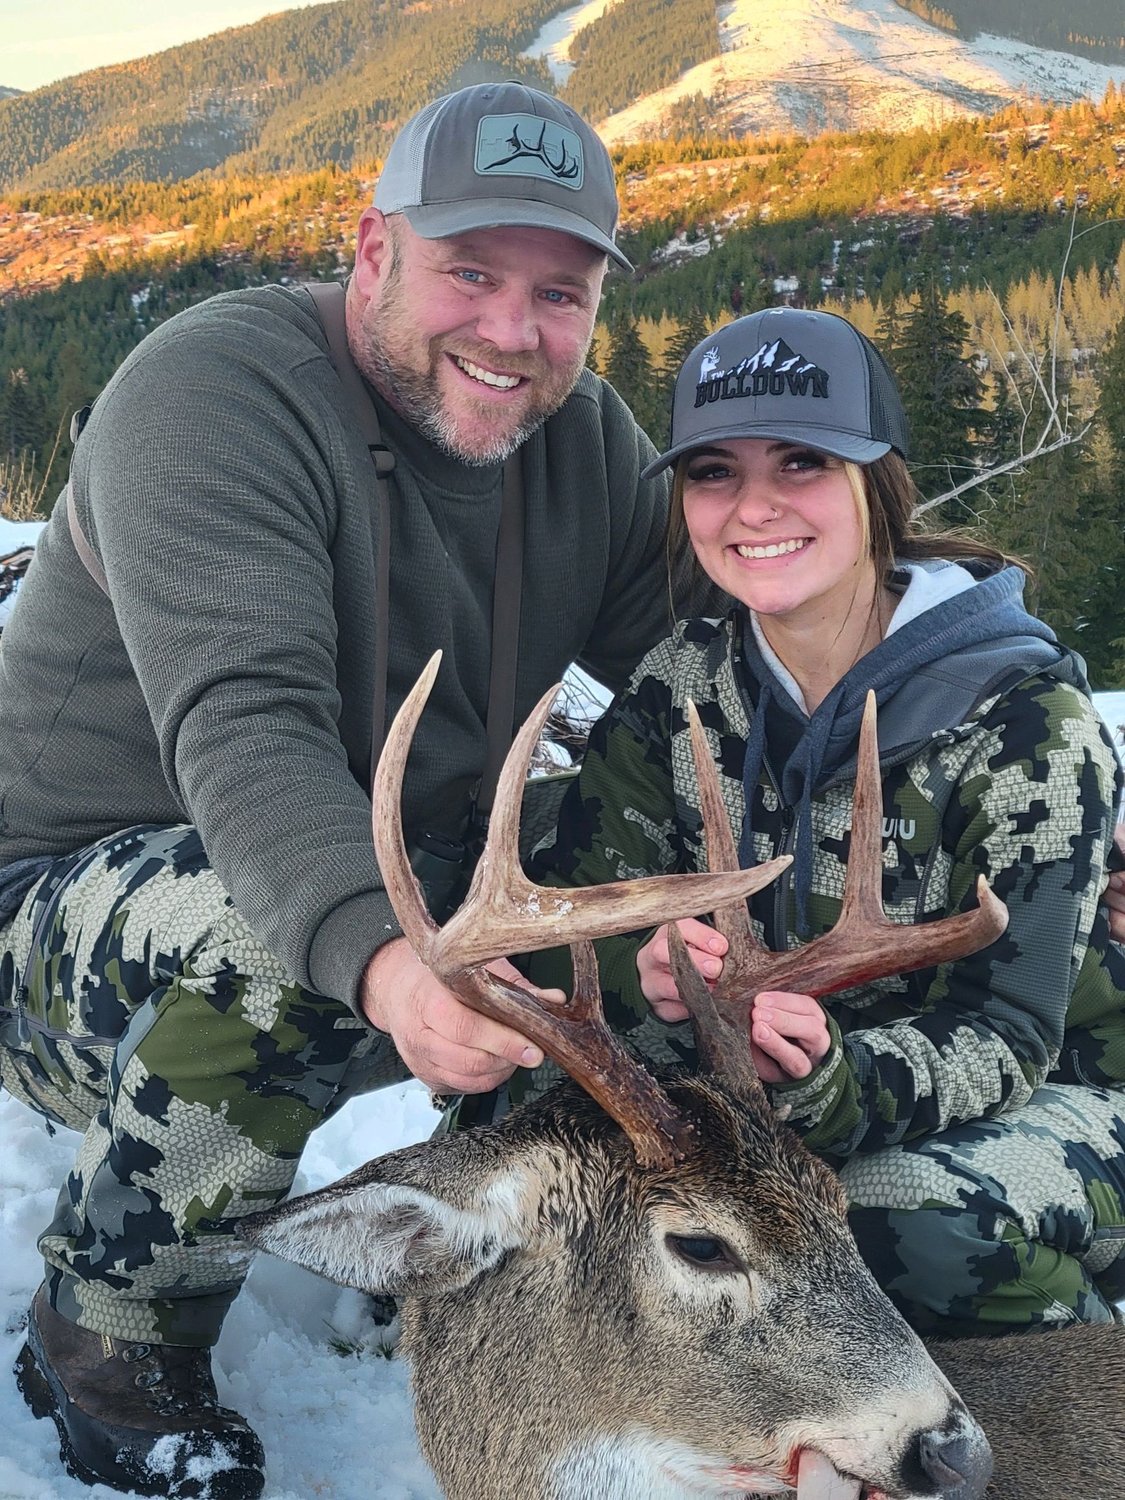 “Jessa Lenzi went hunting in Northern Idaho for her 18th birthday. She harvested this beautiful whitetail buck on Thanksgiving day with her dad.” — submitted by KCL Excavating Inc.